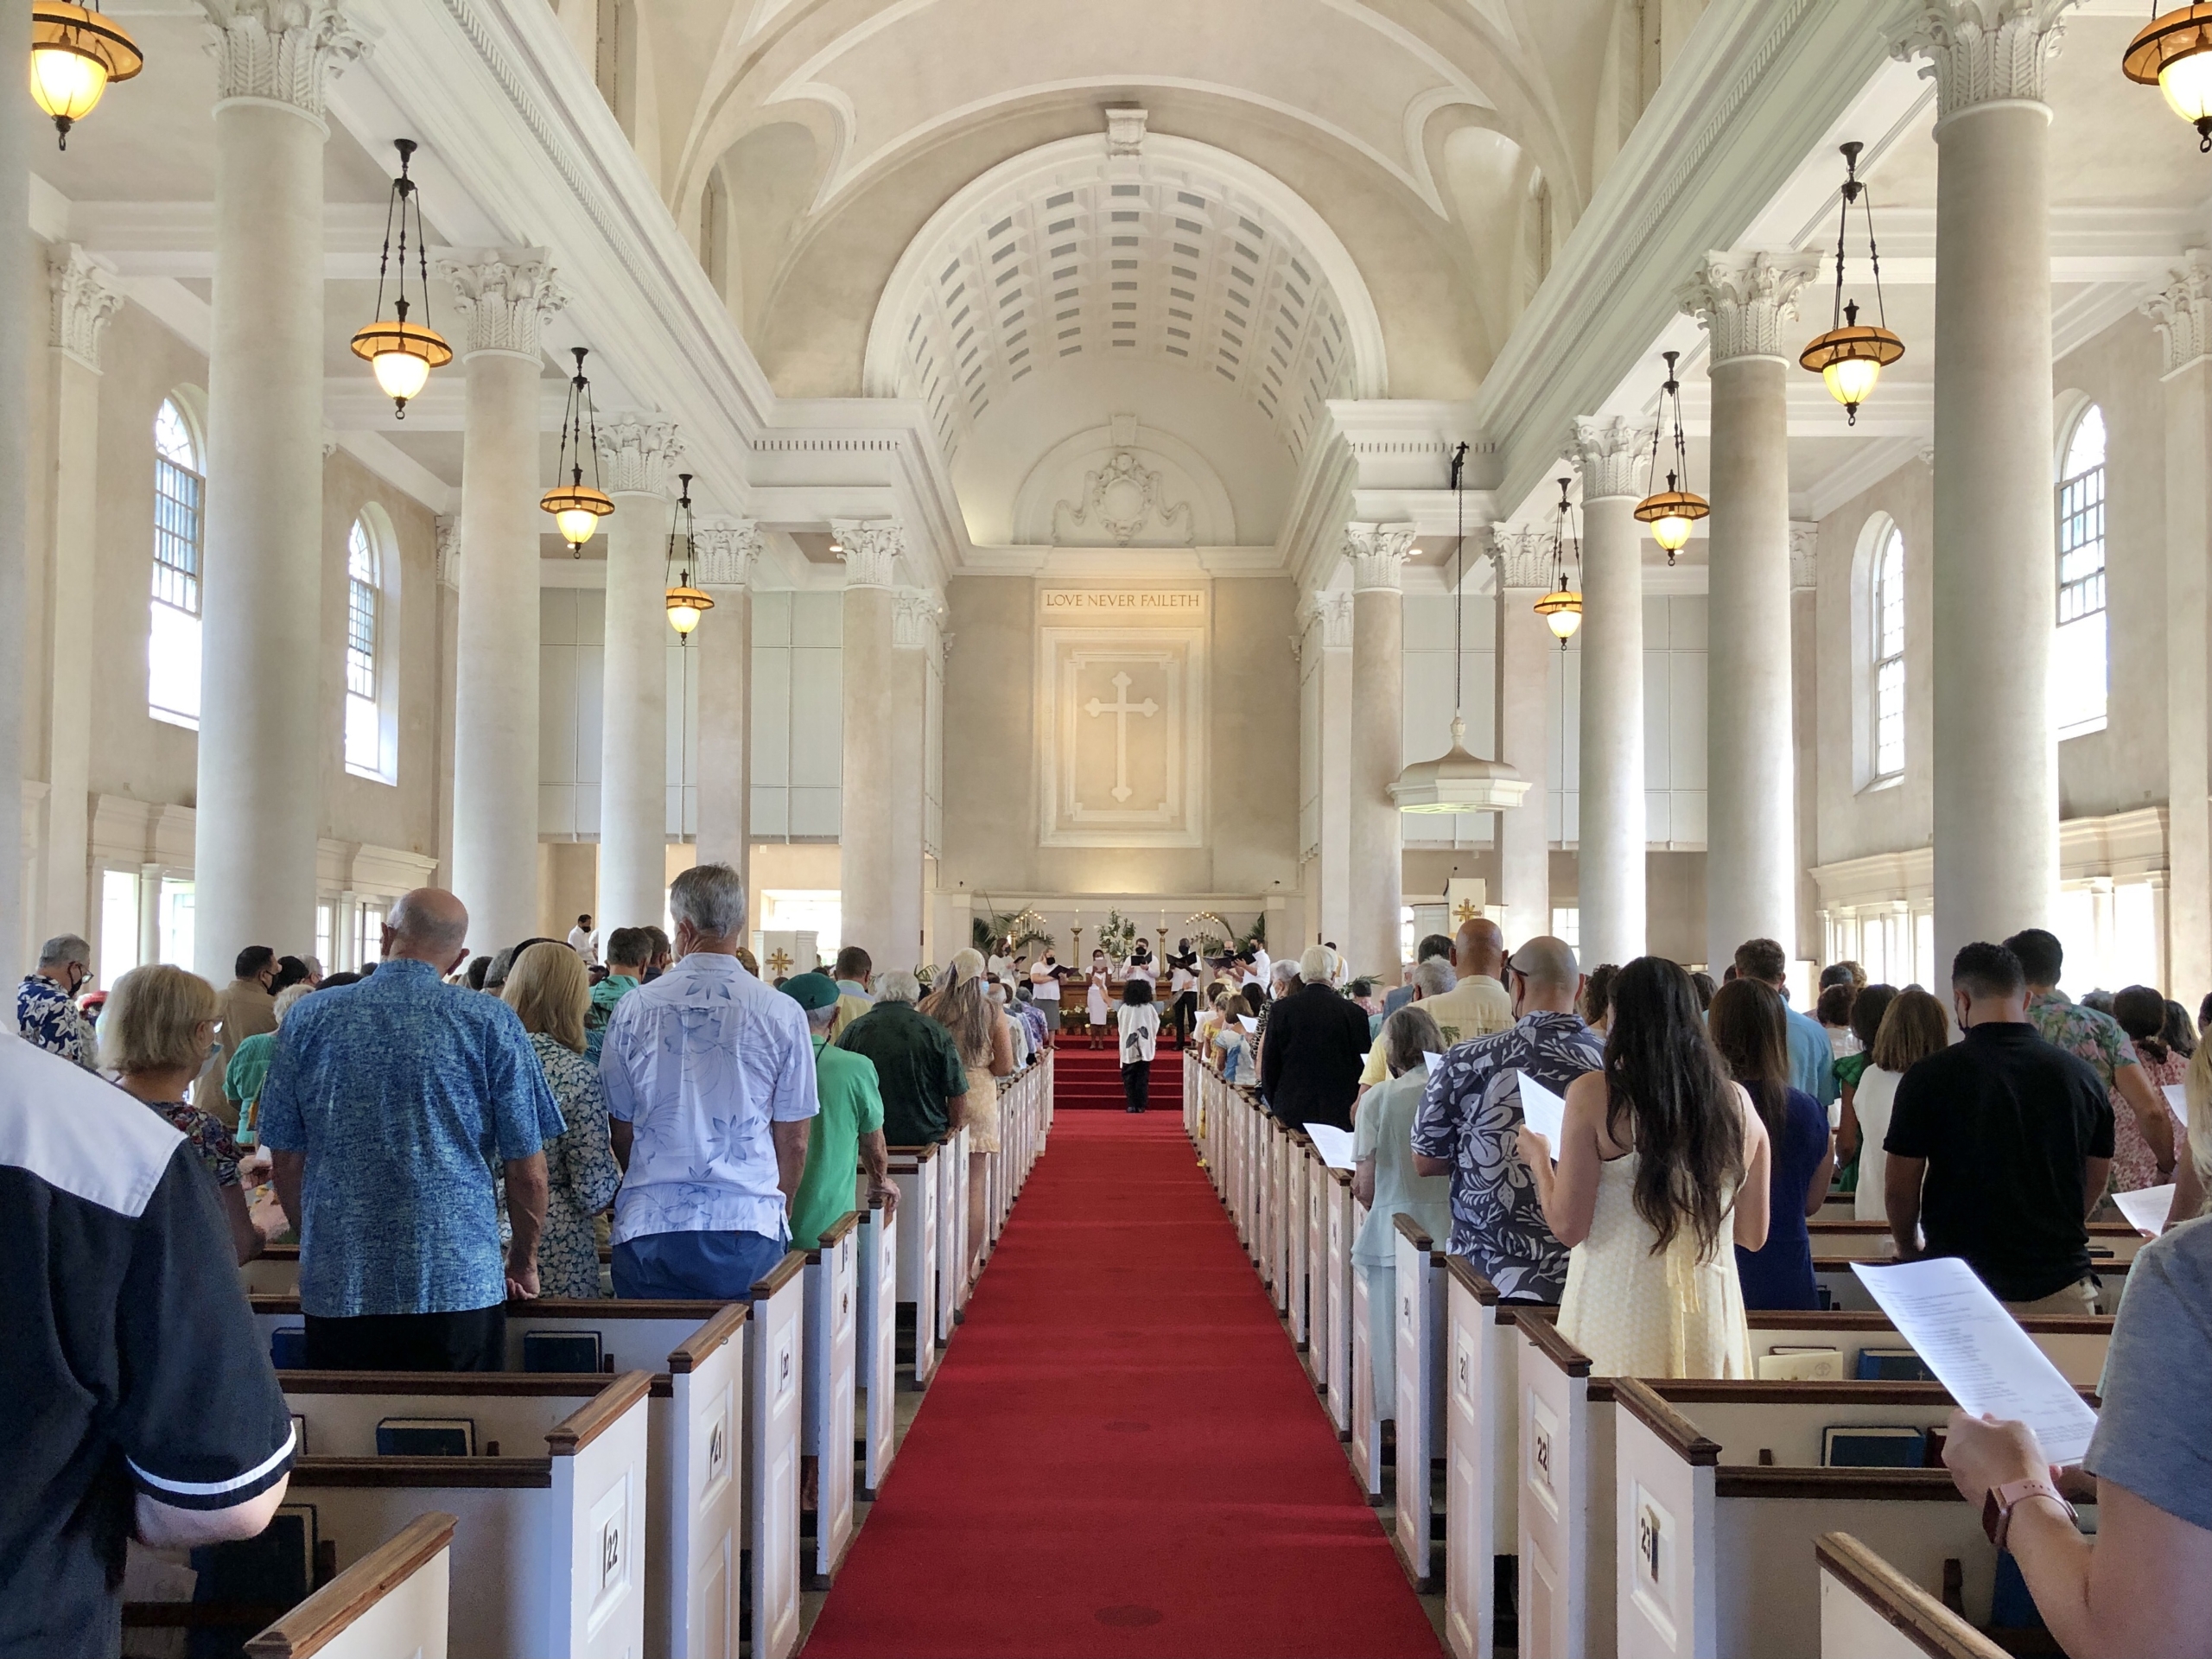 people standing in pews in sanctuary taken from middle of aisle looking forward facing people's backs